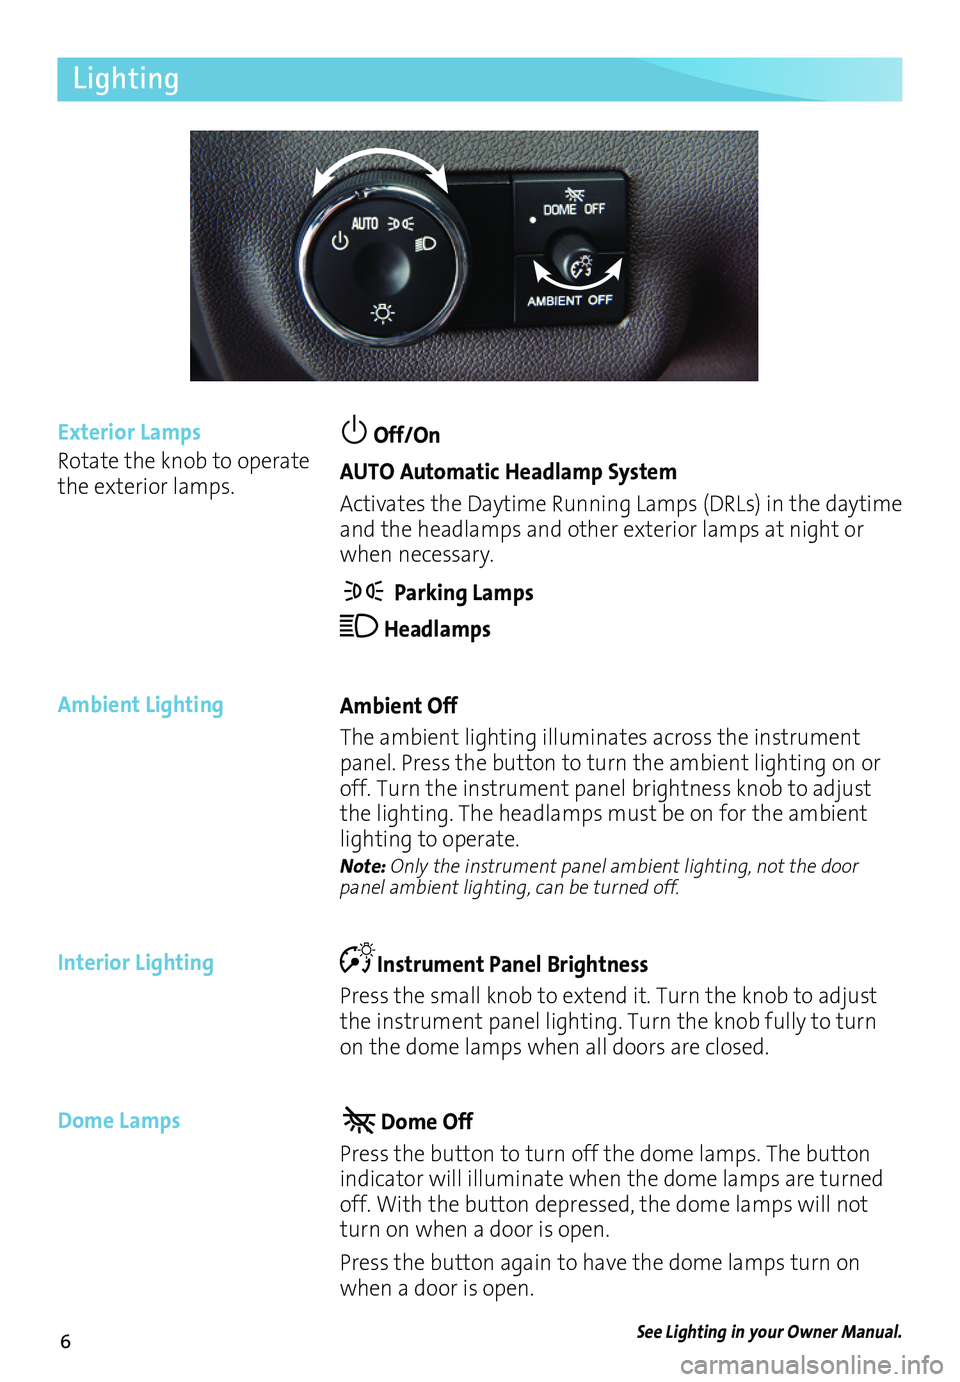 BUICK ENCLAVE 2017  Get To Know Guide 6
Lighting
 Off/On 
AUTO Automatic Headlamp System
Activates the Daytime Running Lamps (DRLs) in the  daytime and the headlamps and other exterior lamps at night or when necessary.
 Parking Lamps
 Hea